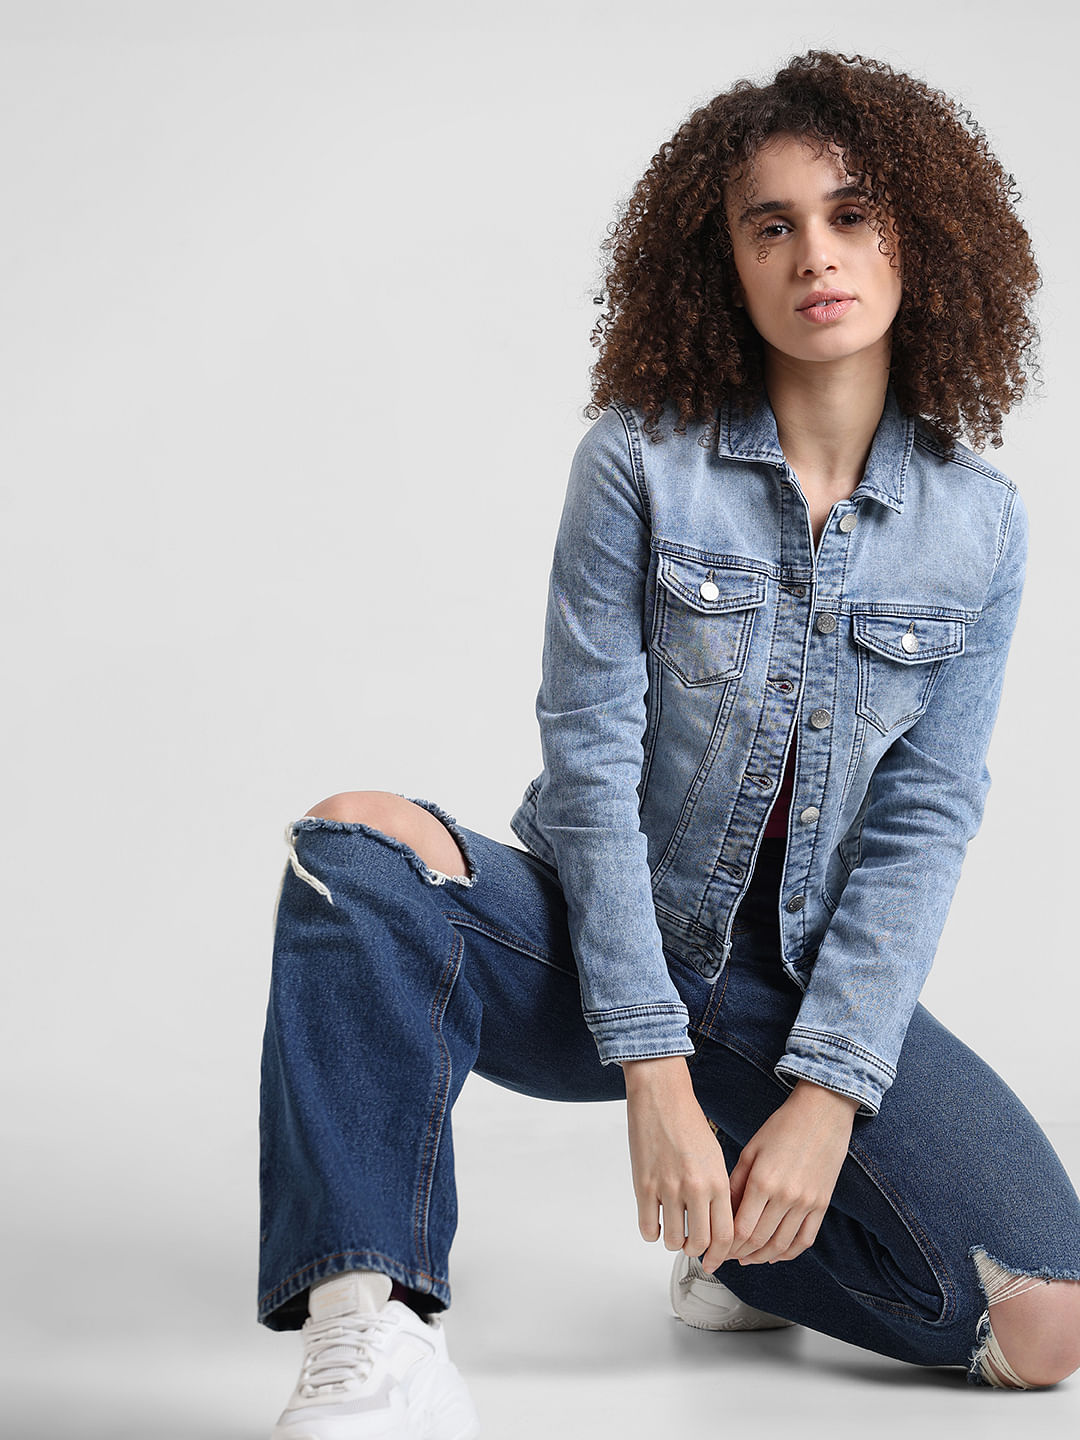 18 Jean Jacket Outfits You Haven't Tried Yet